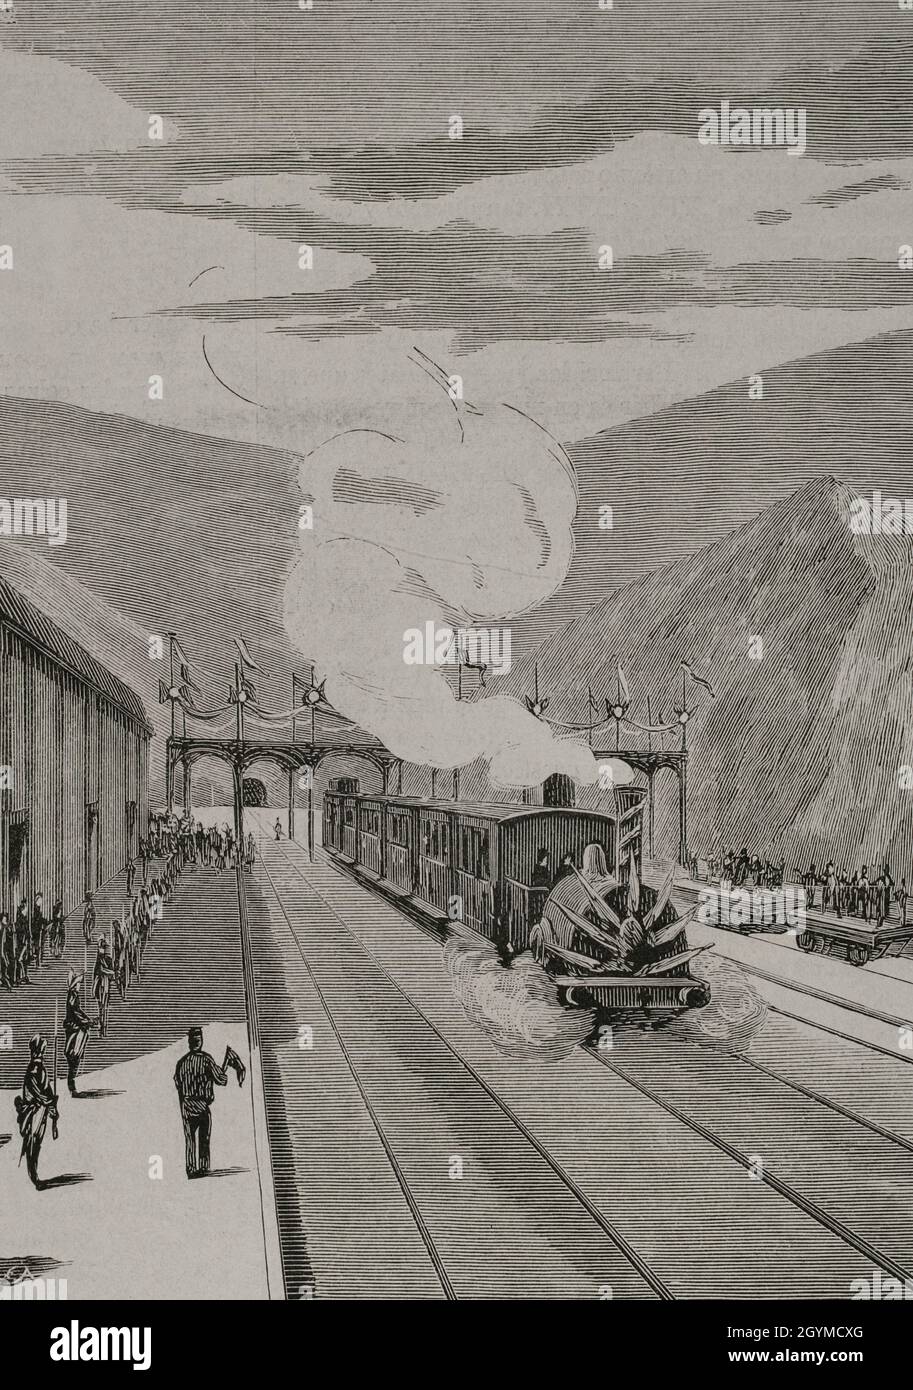 History of transport, 19th century. Inauguration of the France Railroad in Gerona, on January 20, 1878. This section linked the general line of Catalonia with the French line of Perpignan. Arrival of the train with the Spanish commission at Port-Bou station. Engraving. La Ilustración Española y Americana, 1878. Stock Photo